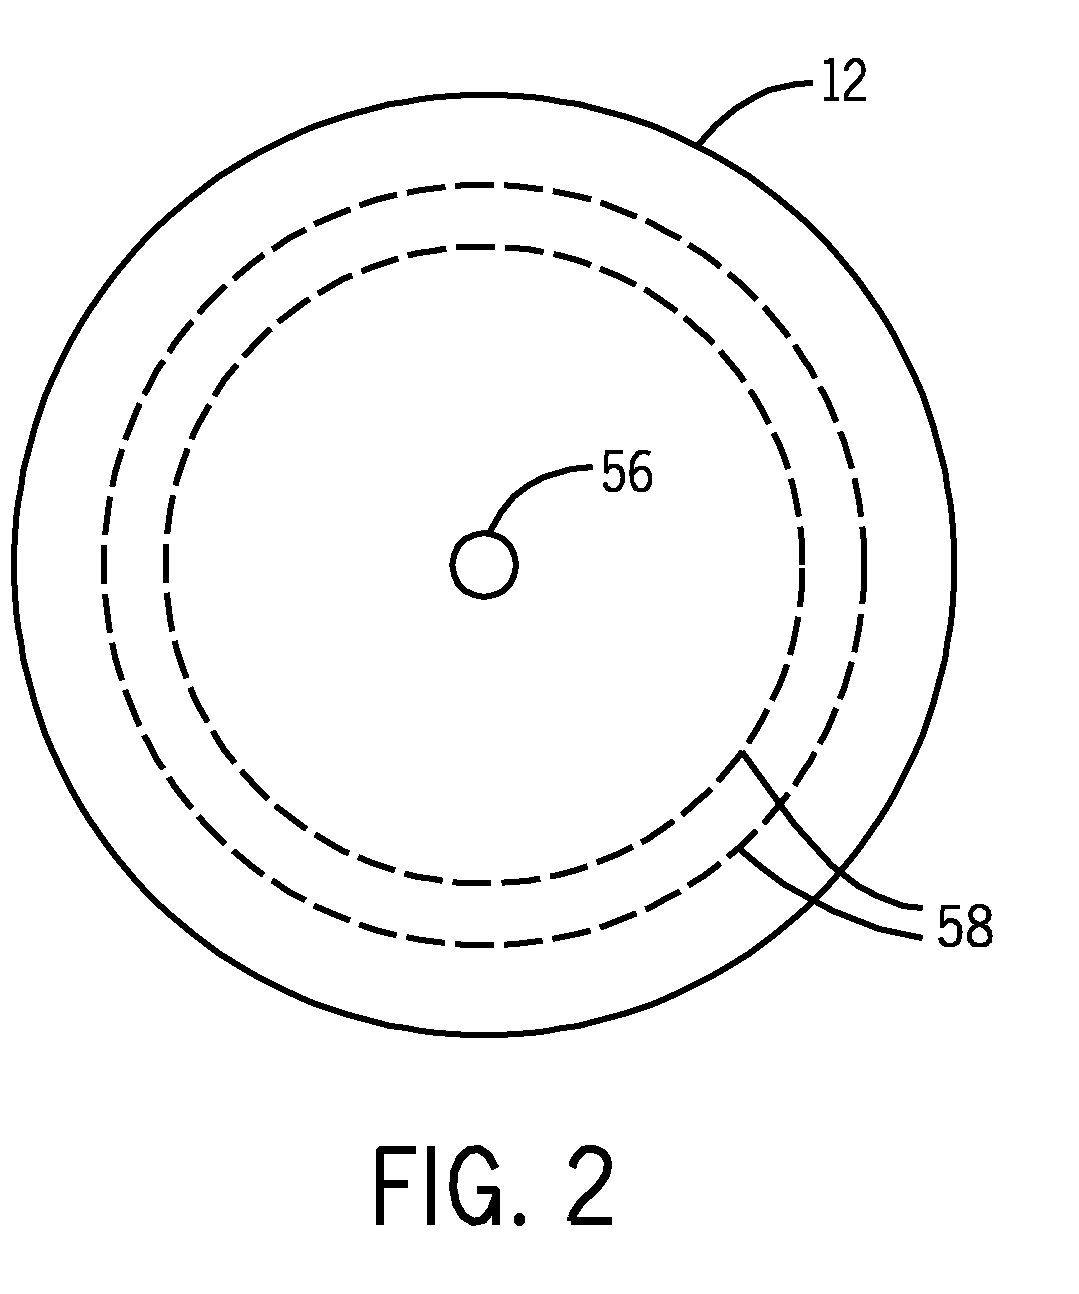 System and method for storage of data in circular data tracks on optical discs